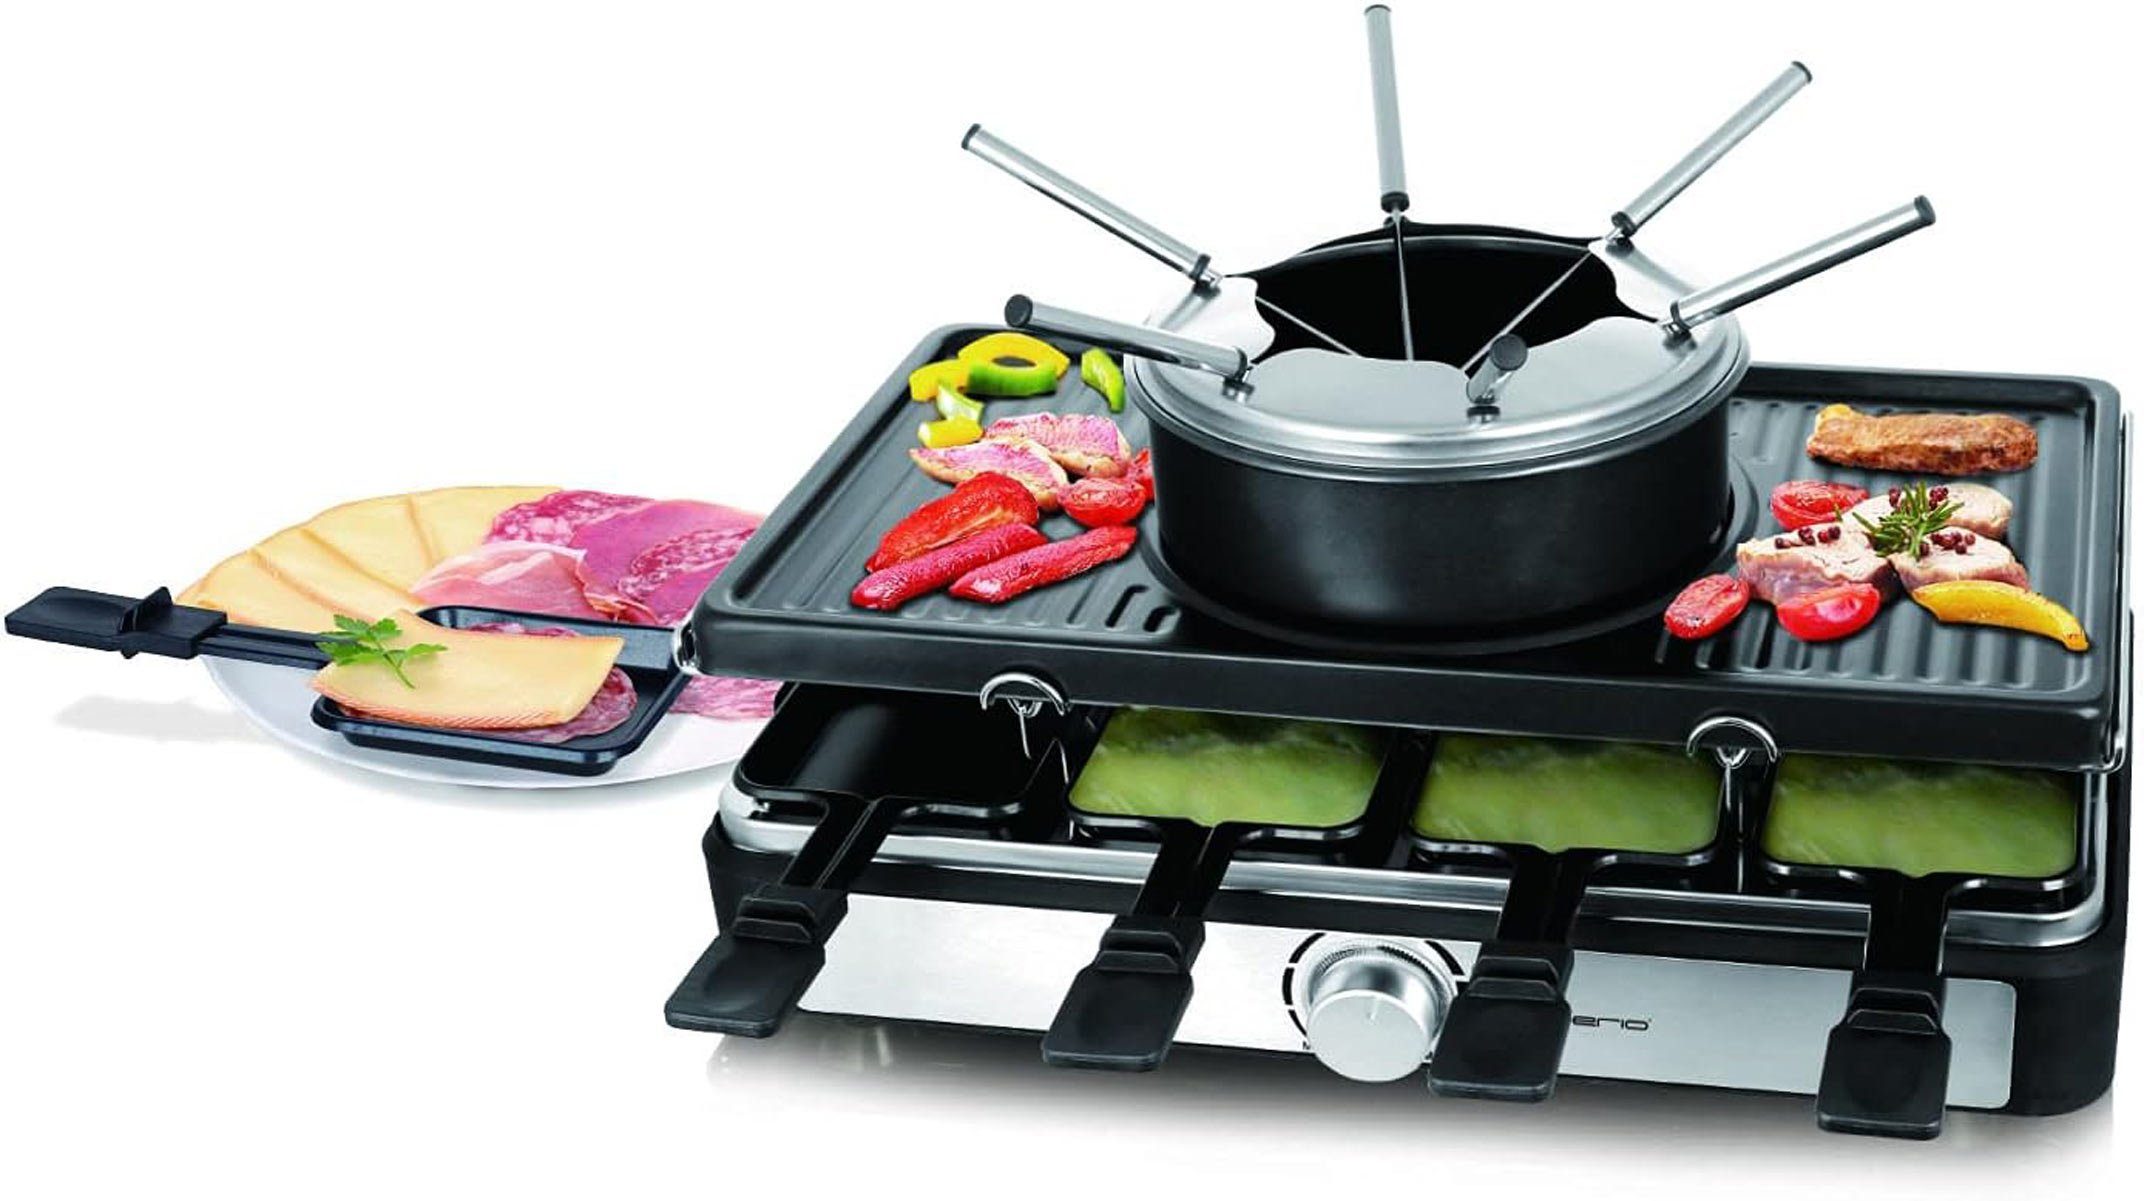 Raclette, Fondue Raclette W RG 1300 Grill Set, 124930, 3 in Emerio 1 und